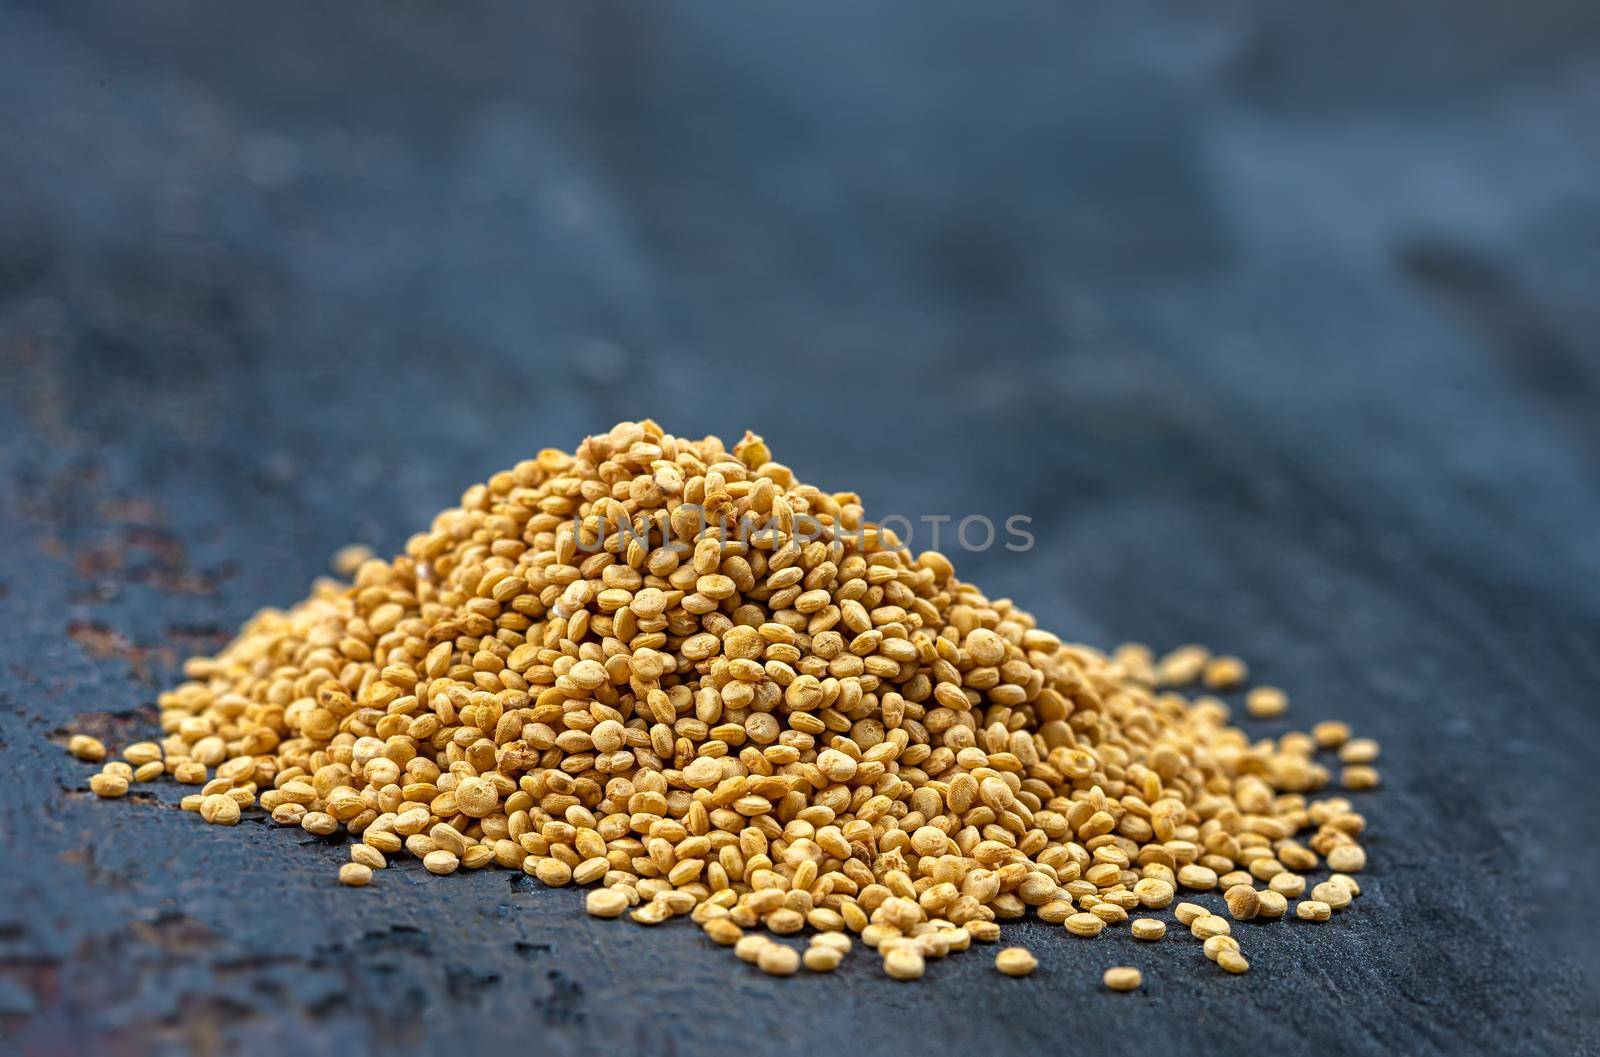 Heaps of Quinoa grains in close-up on a dark background